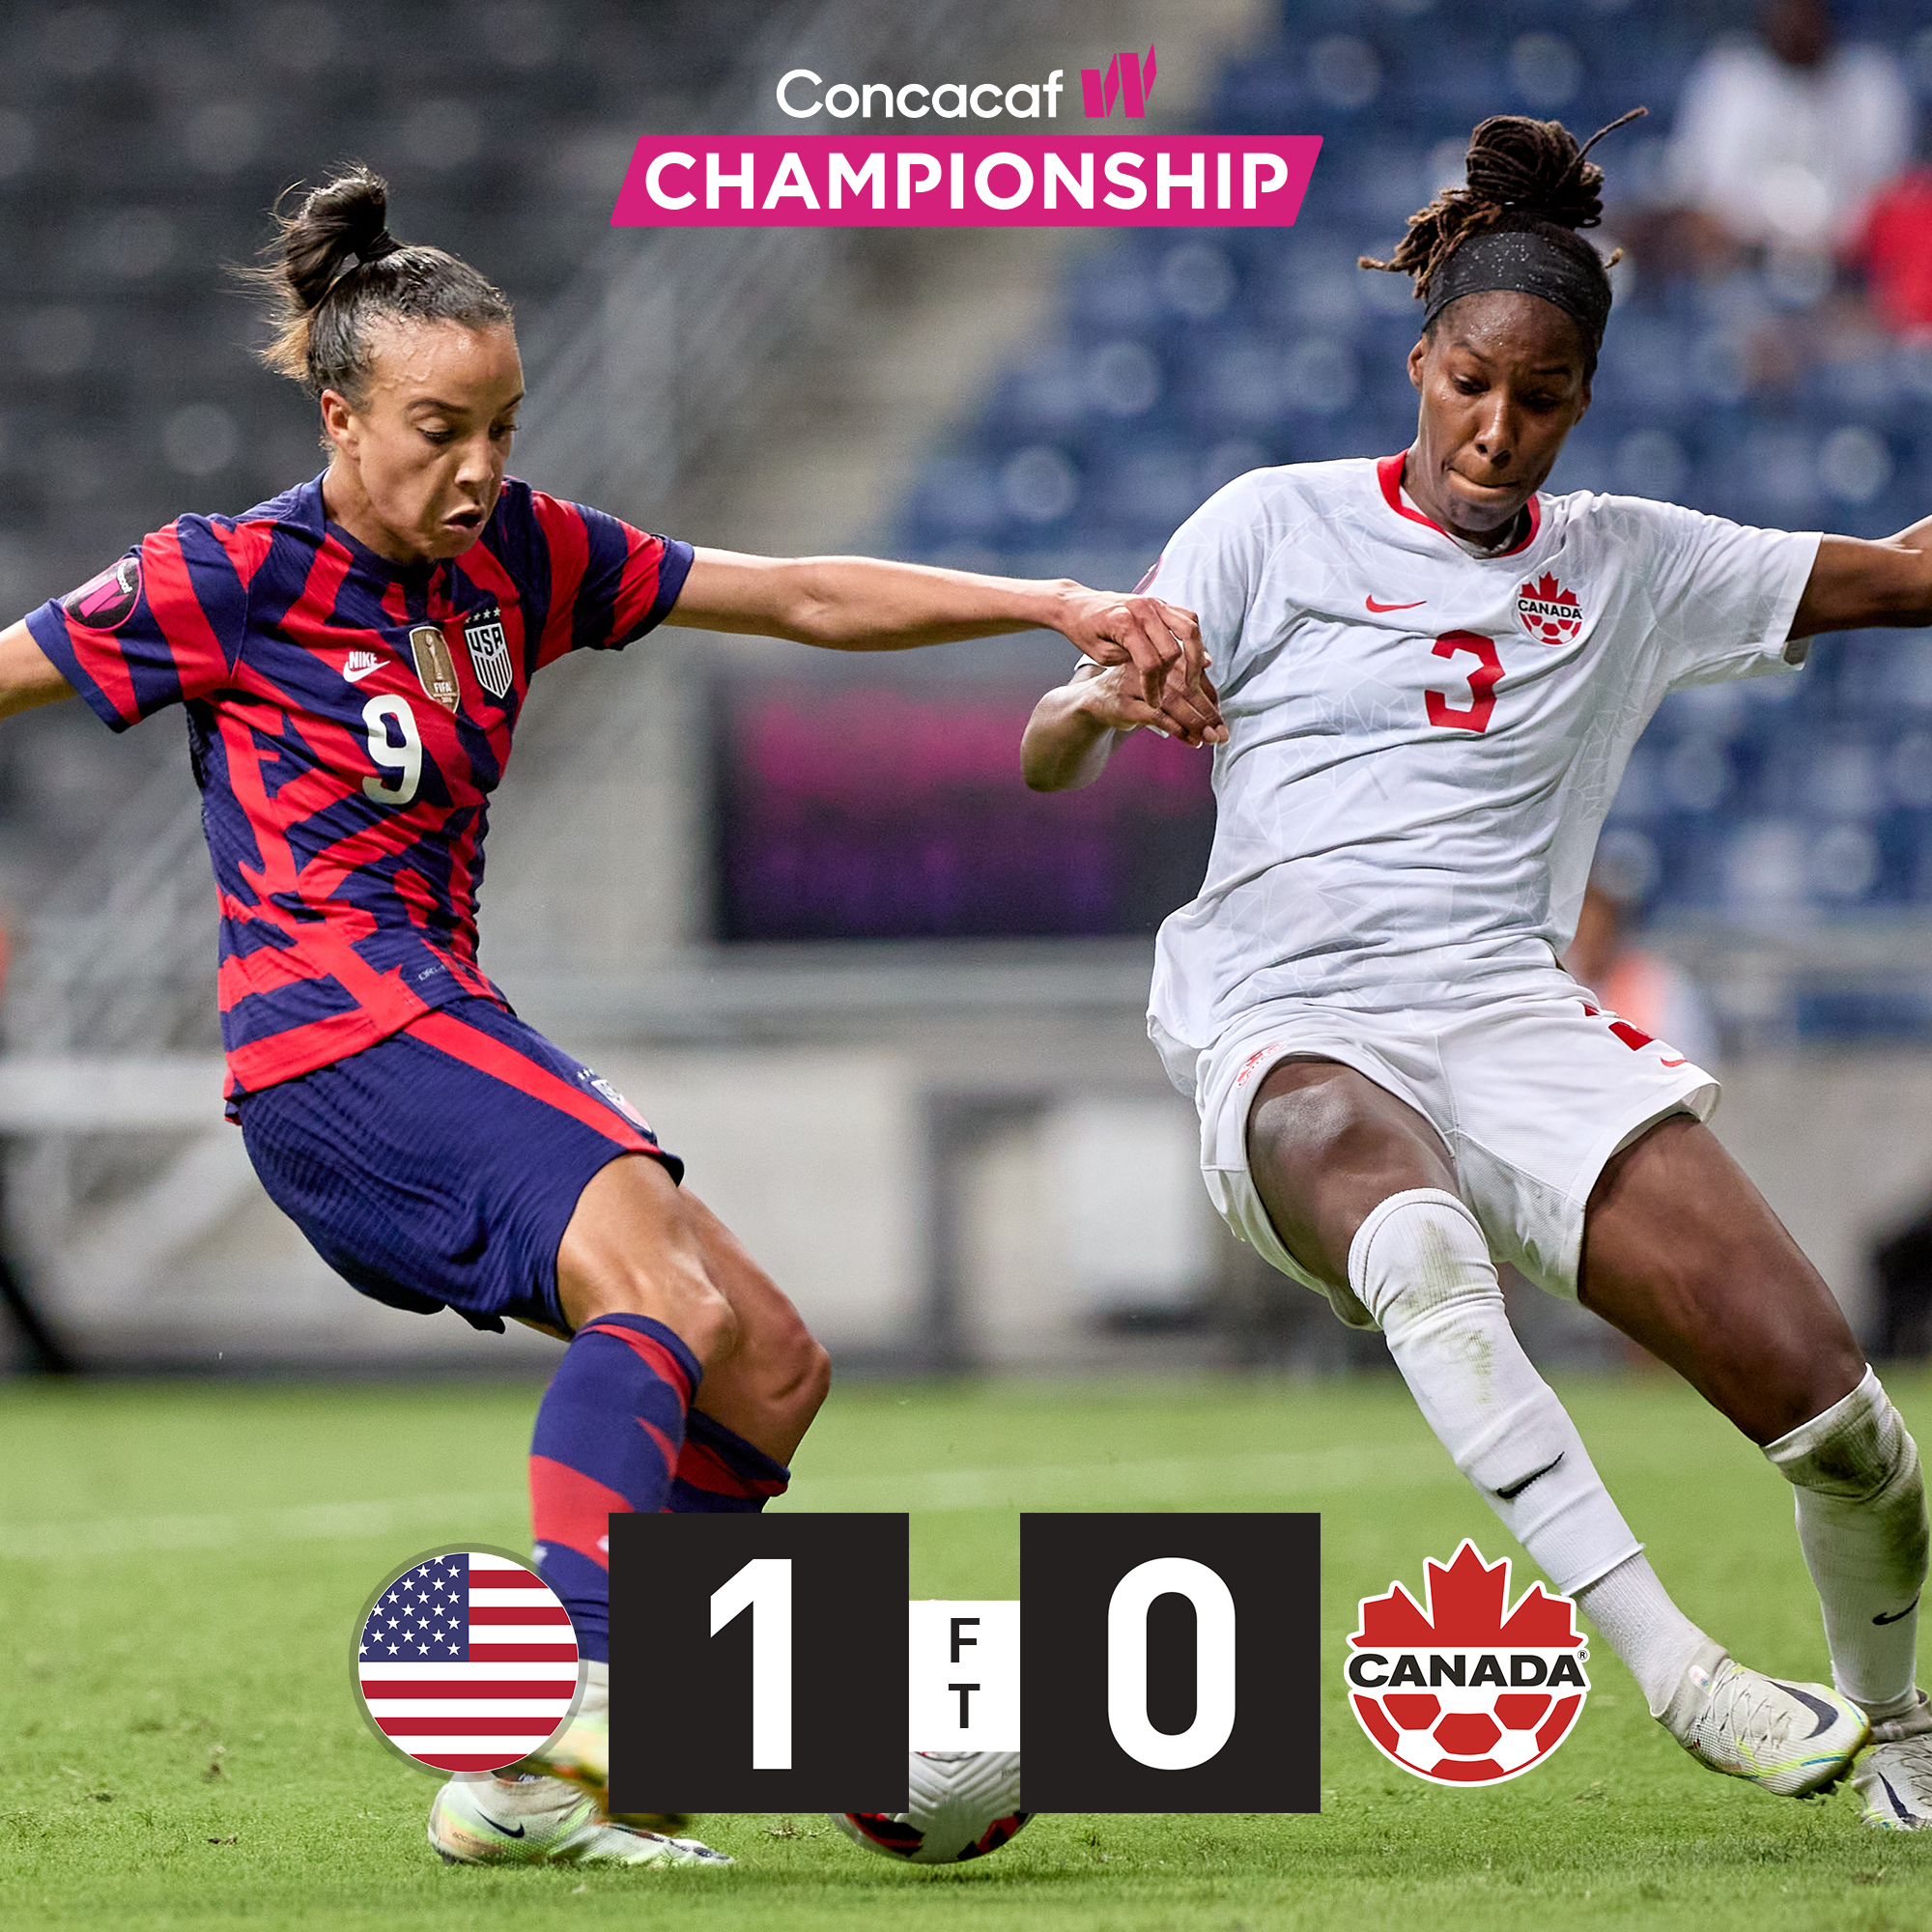 Canada finish second at Concacaf W Championship after narrow 1:0 defeat to USA